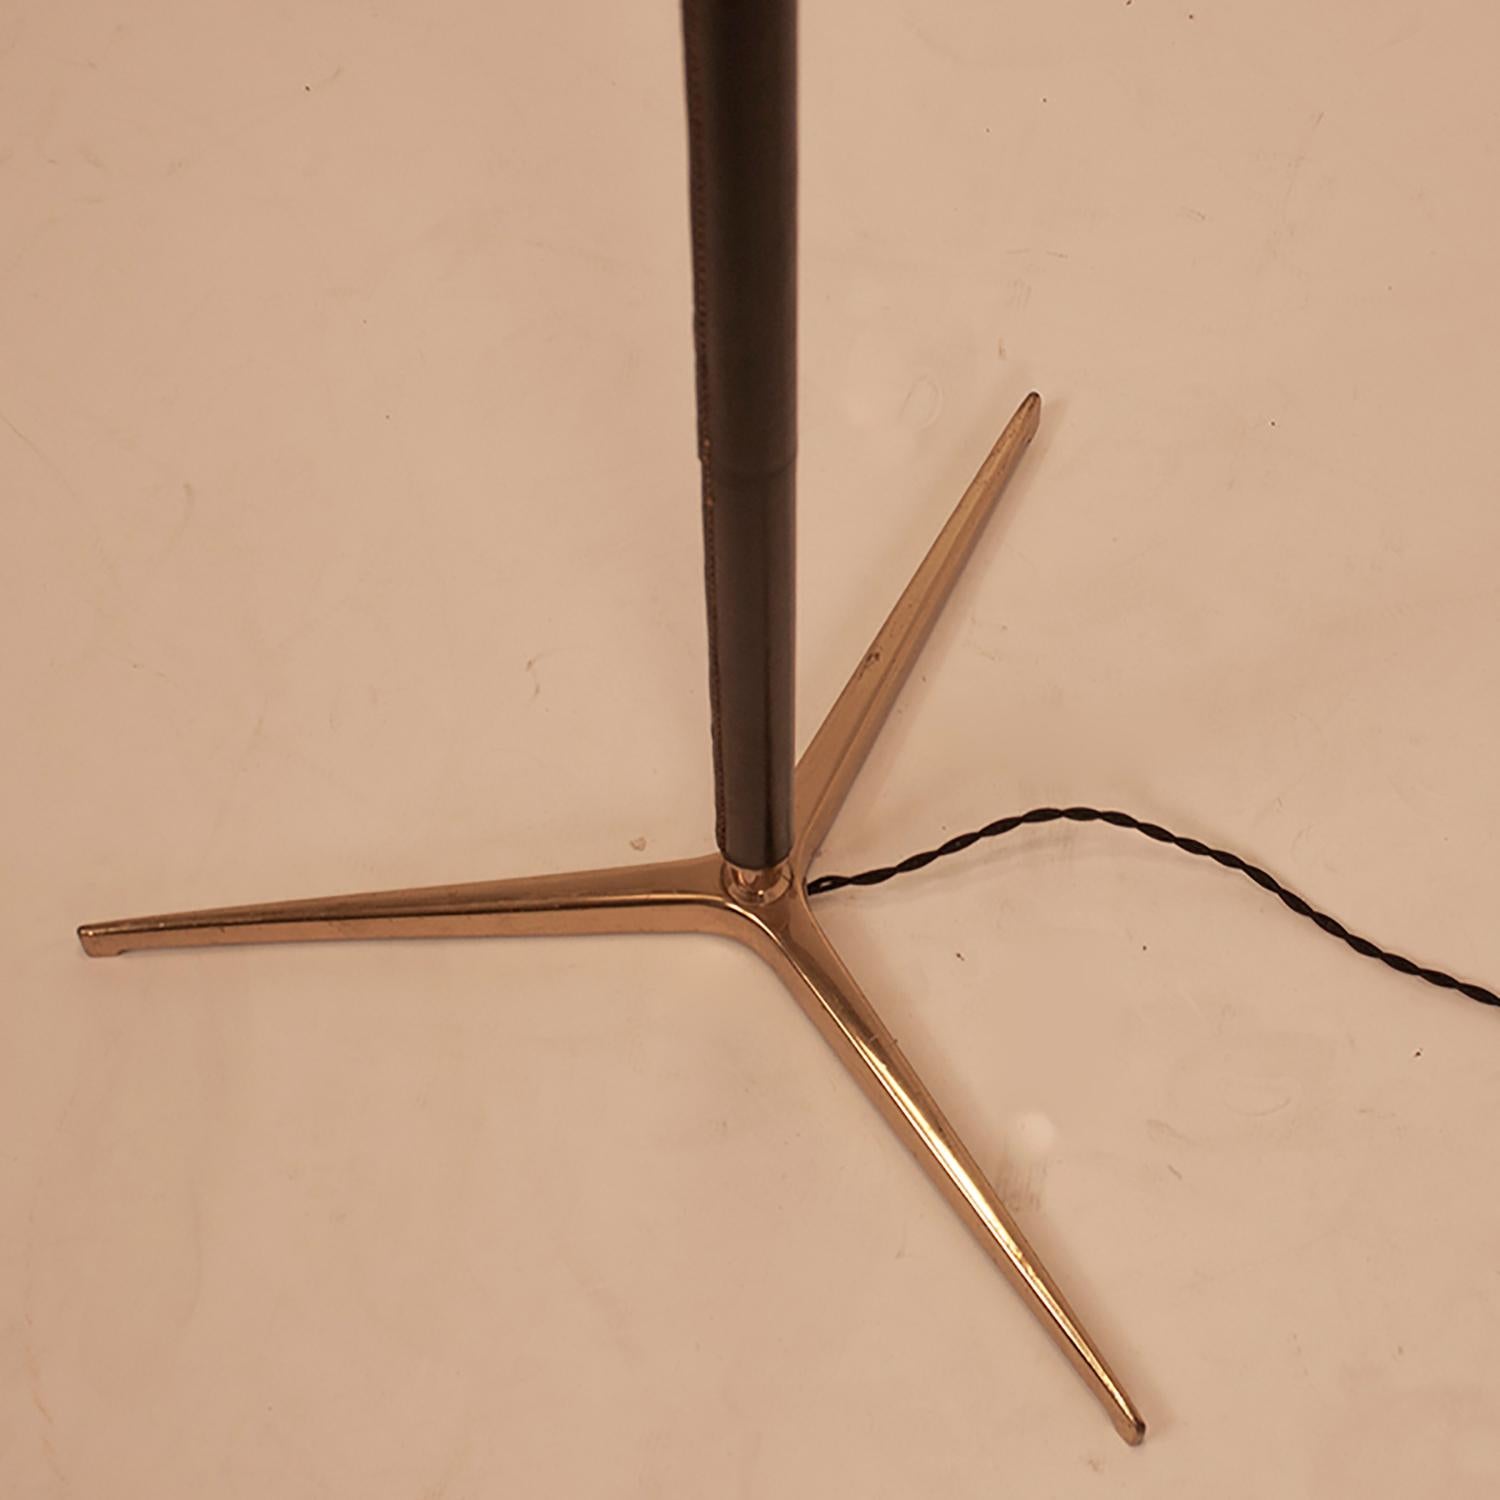 Floor lamp attributed to Gino Sarfatti with adjustable tubular polished brass stem wrapped in black leather. New fabric screen, 1950s.
Measures: Minimum height 172cm
Maximum height 220cm
European Plug (up to 250V). I have had a professional